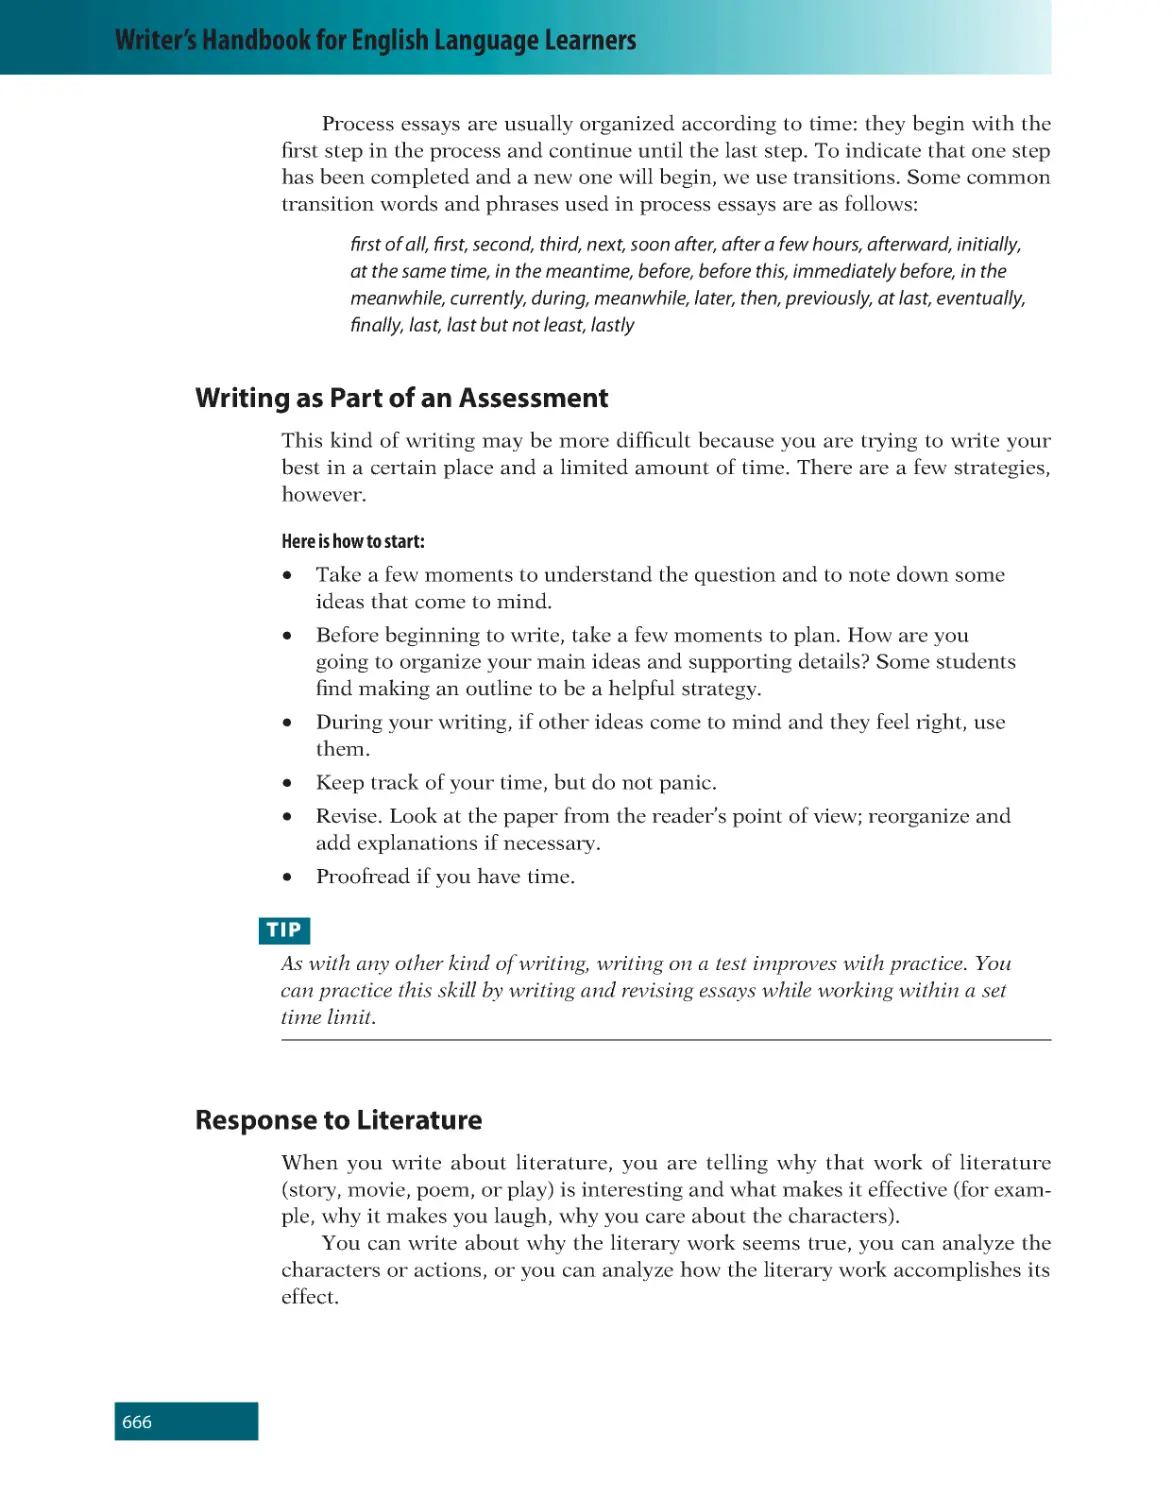 Writing as Part of an Assessment
Response to Literature